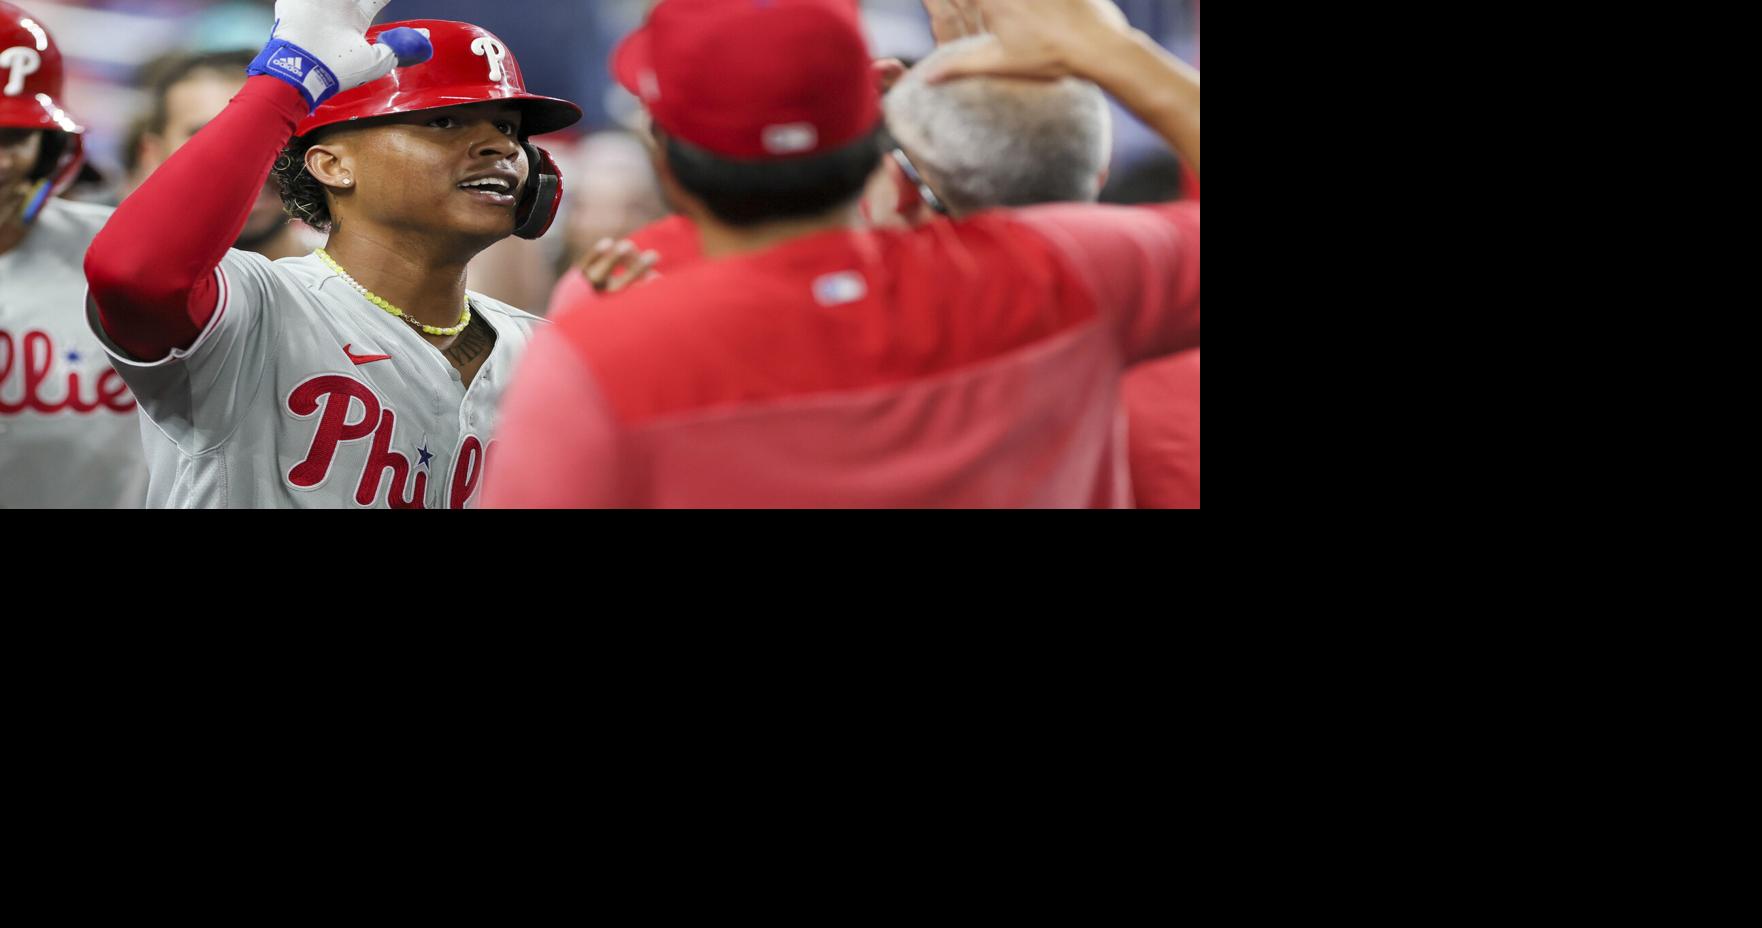 CRISTIAN PACHE GOES YARD IN THE 9TH TO COMPLETE THE COMEBACK Phils tie  franchise record for road game win streak (13) WE'RE TALKING ABOUT…